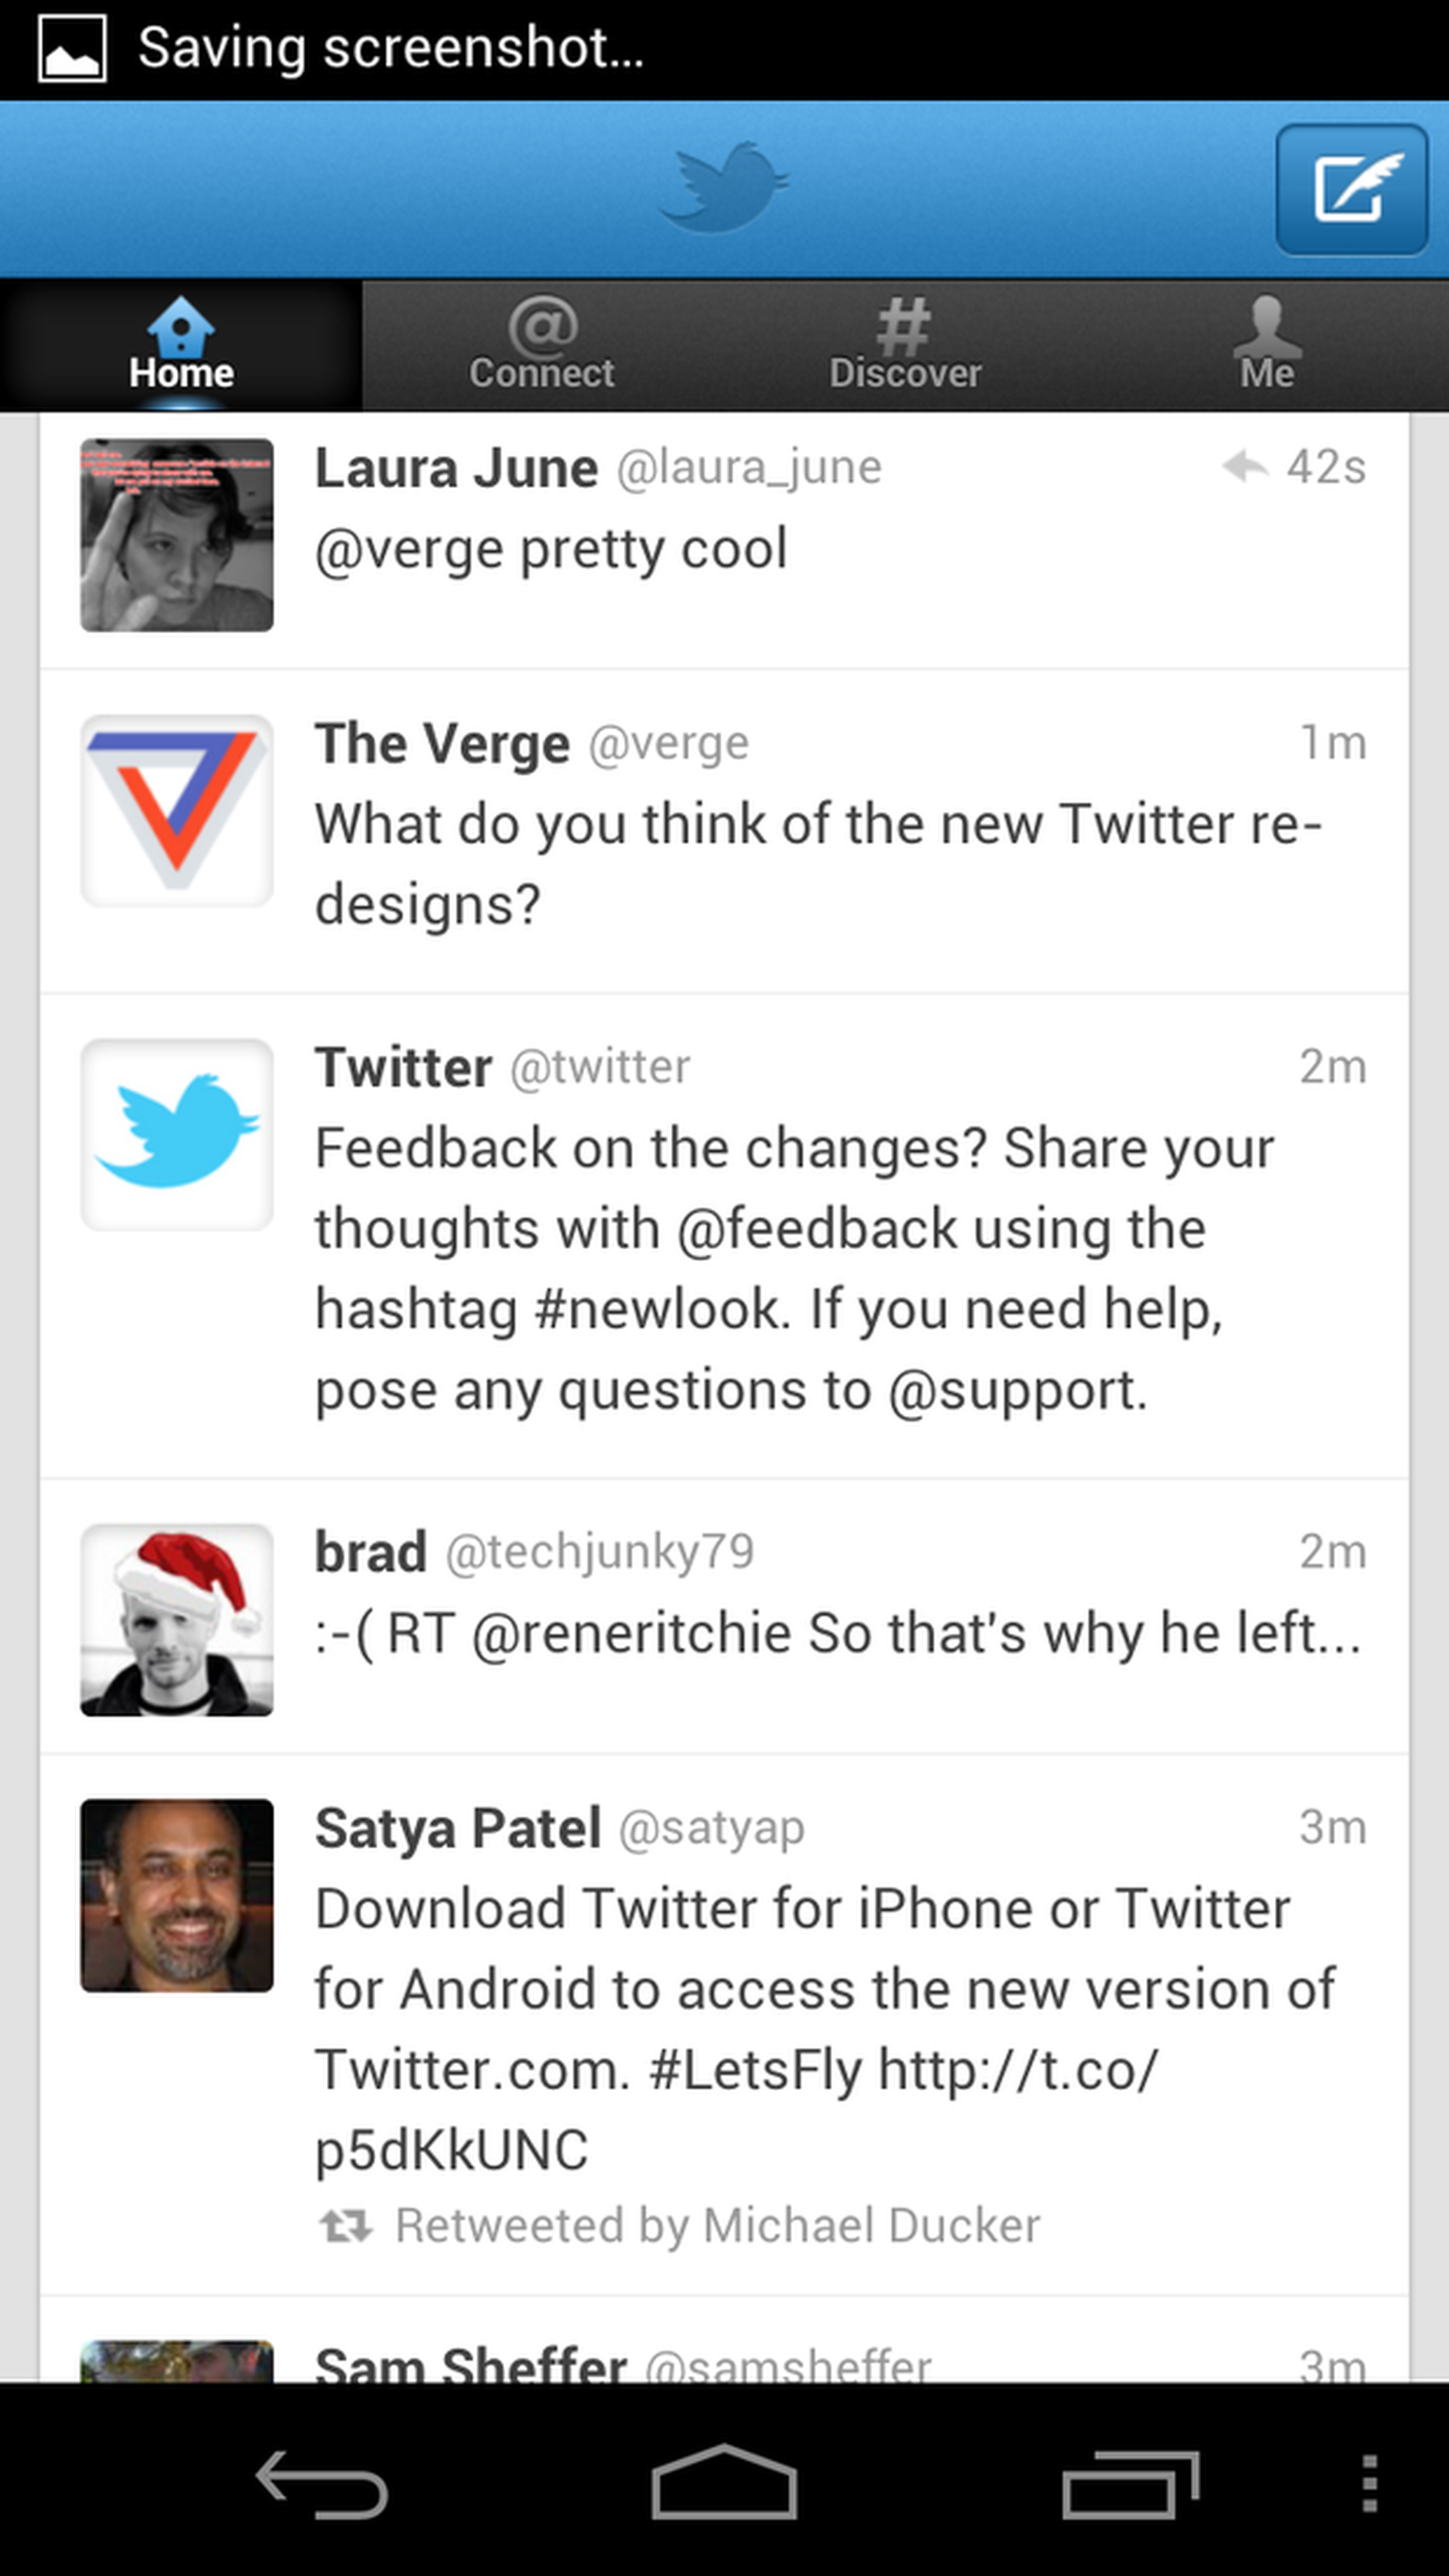 Twitter web, app and mobile redesign 2011 screenshots